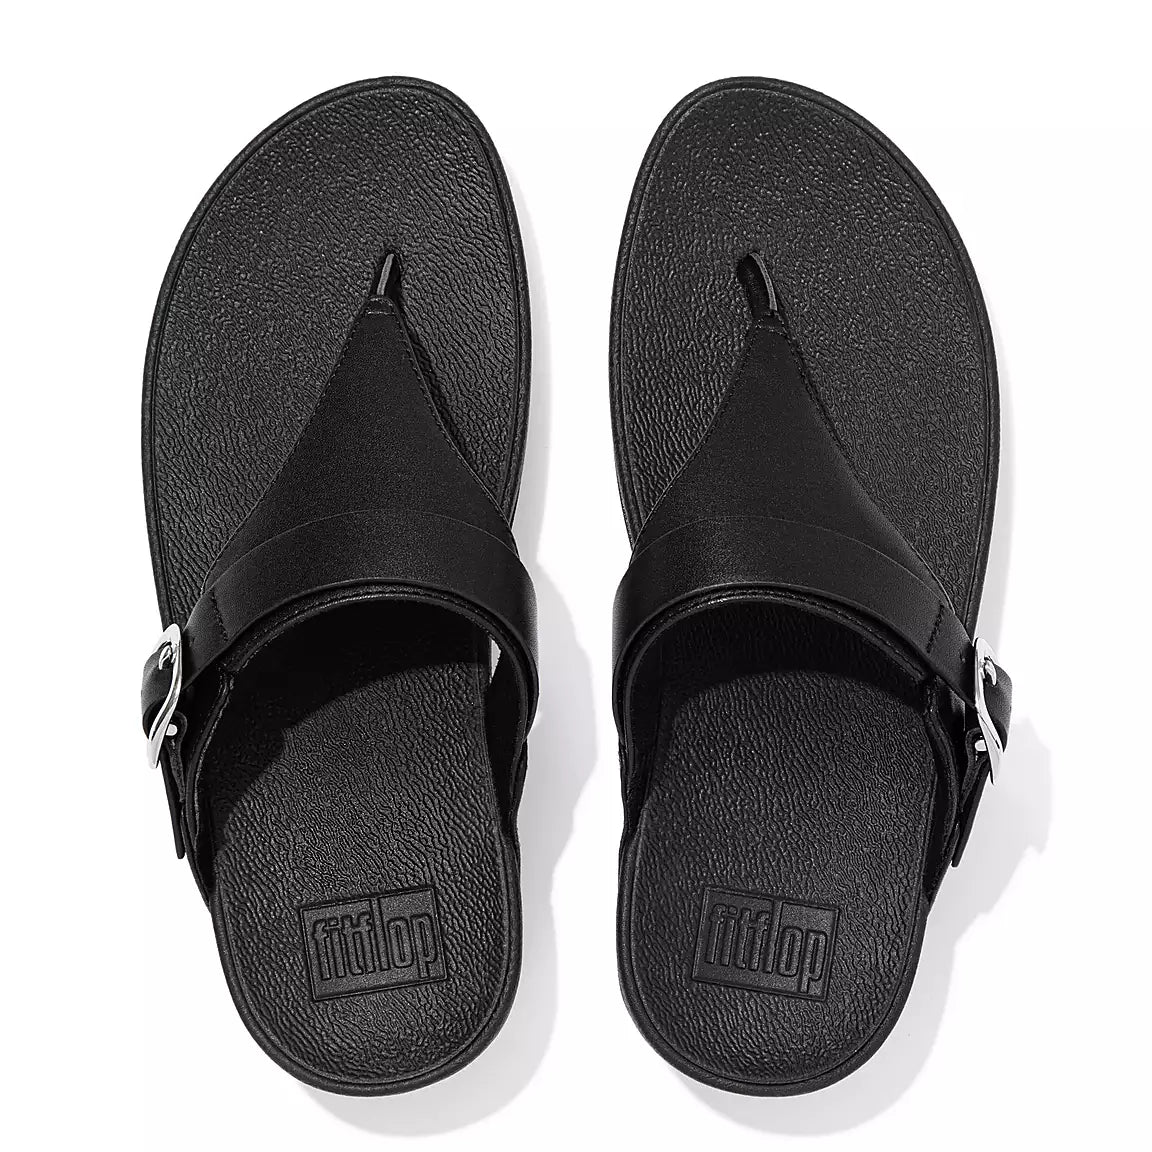 FitFlop FitFlop LULU Adjustable Leather Toe-Posts    